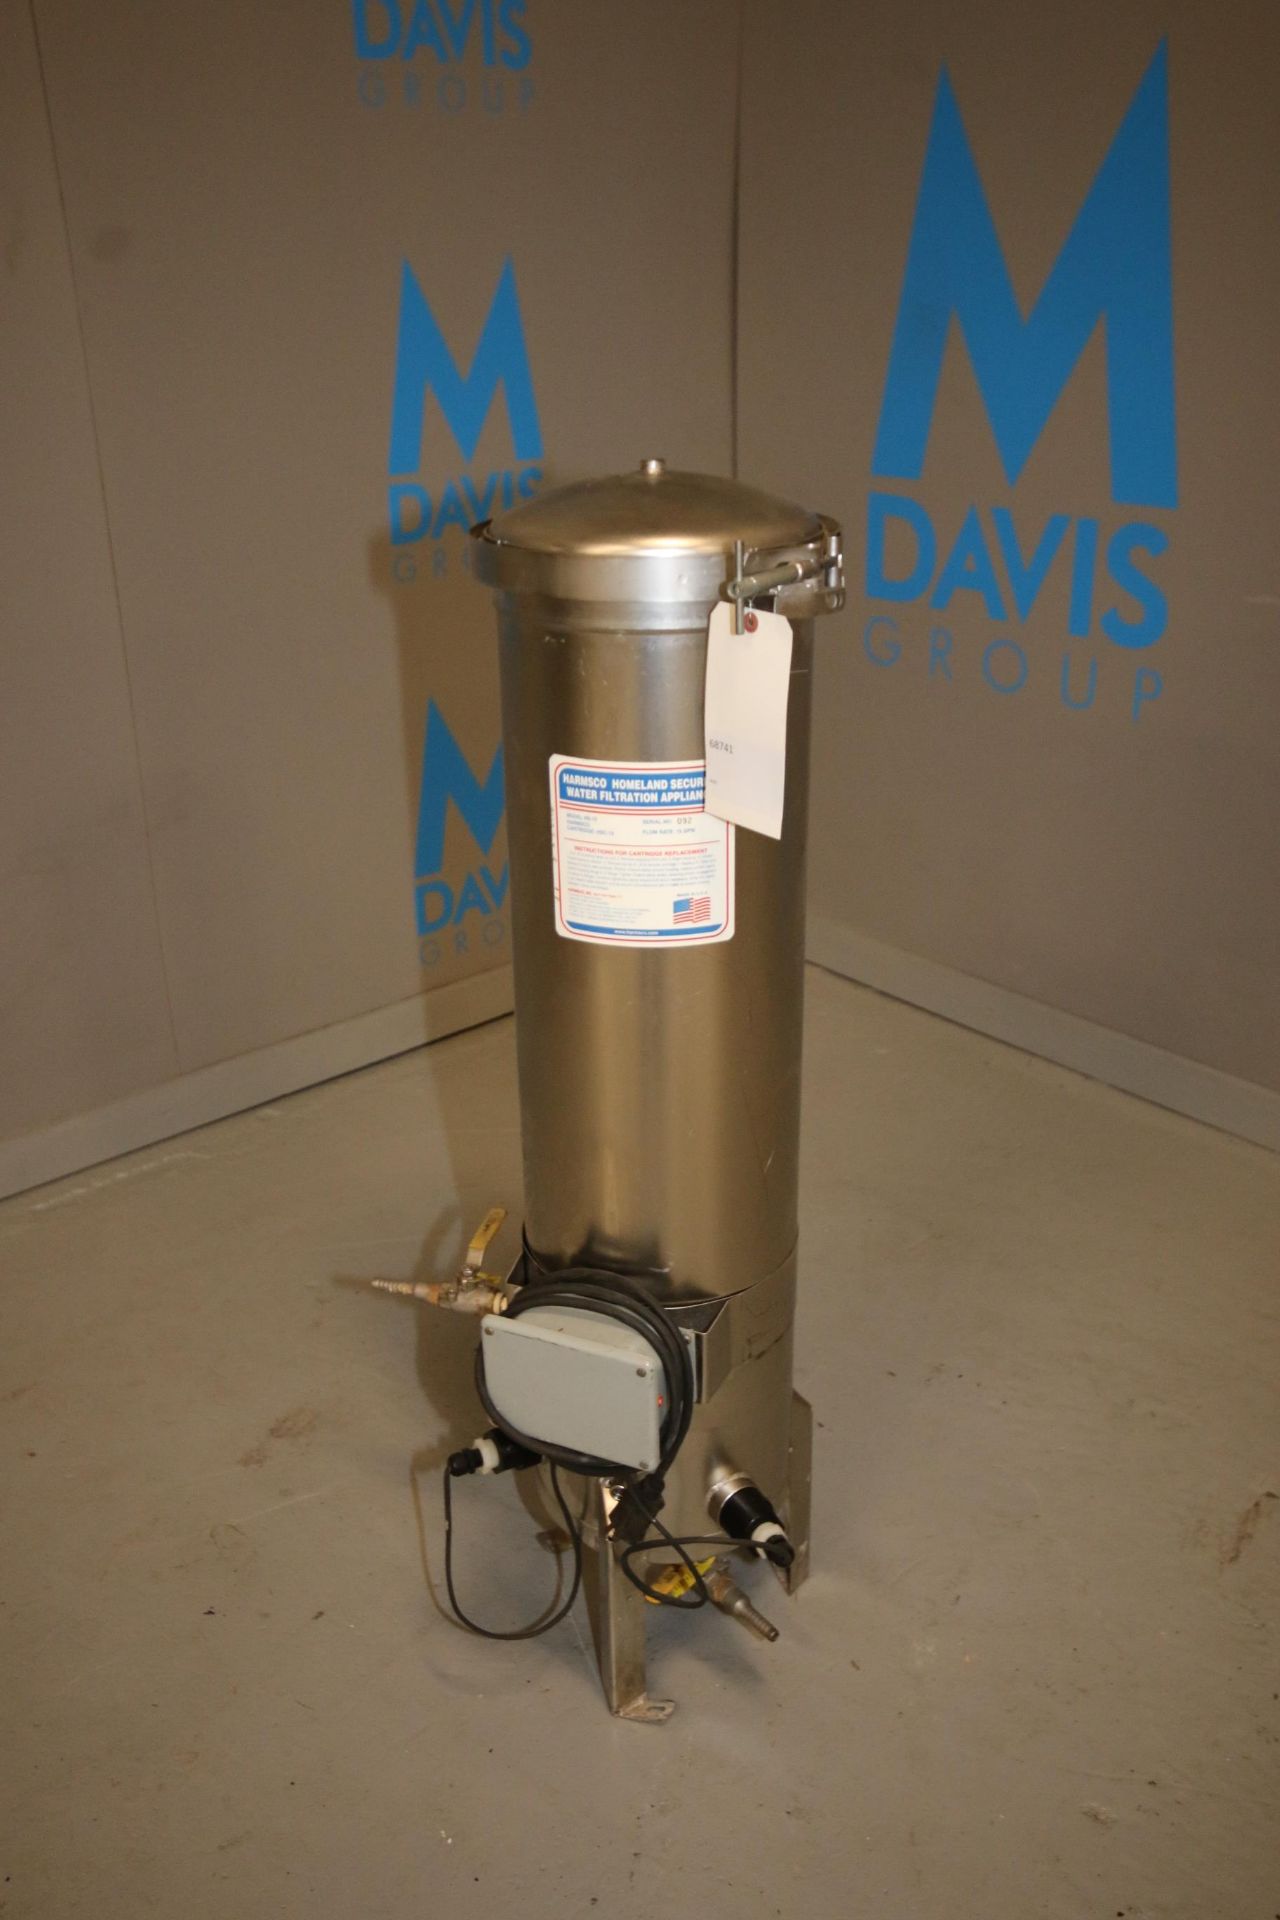 Harmsco S/S Water Filter, Model HS-15, SN 092, 15 GPM, with Valves & Gauges, Filter Dims.: Aprox.